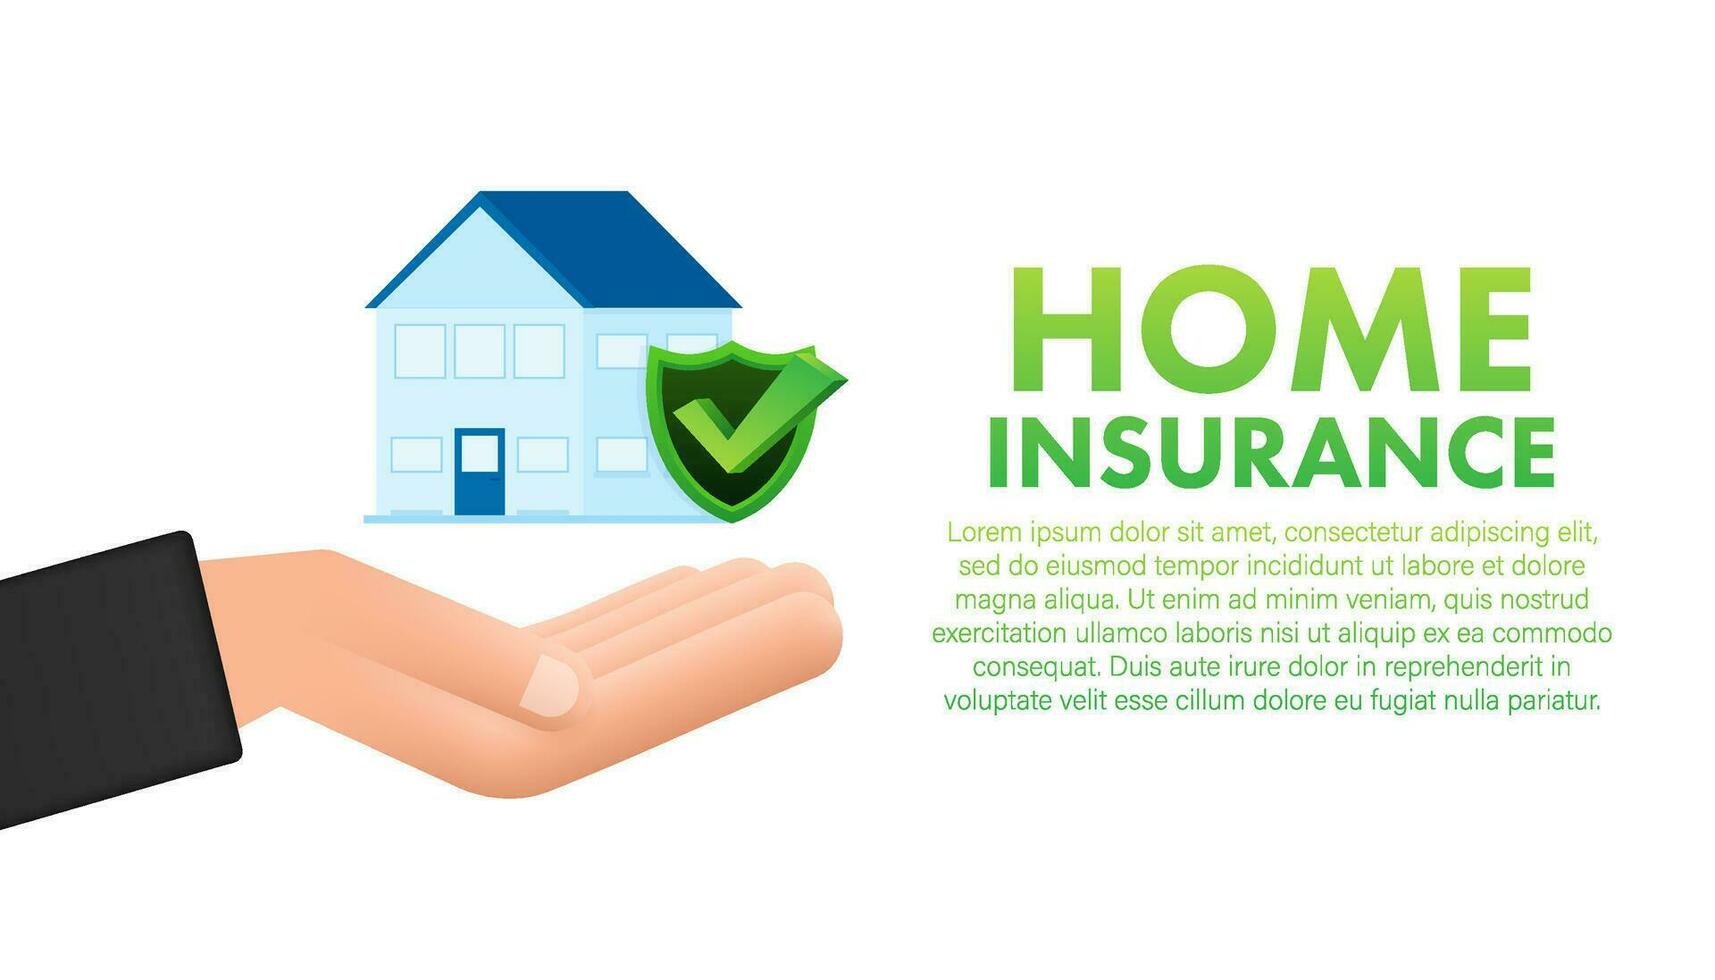 Home insurance policy services. Home safety security. Vector stock illustration